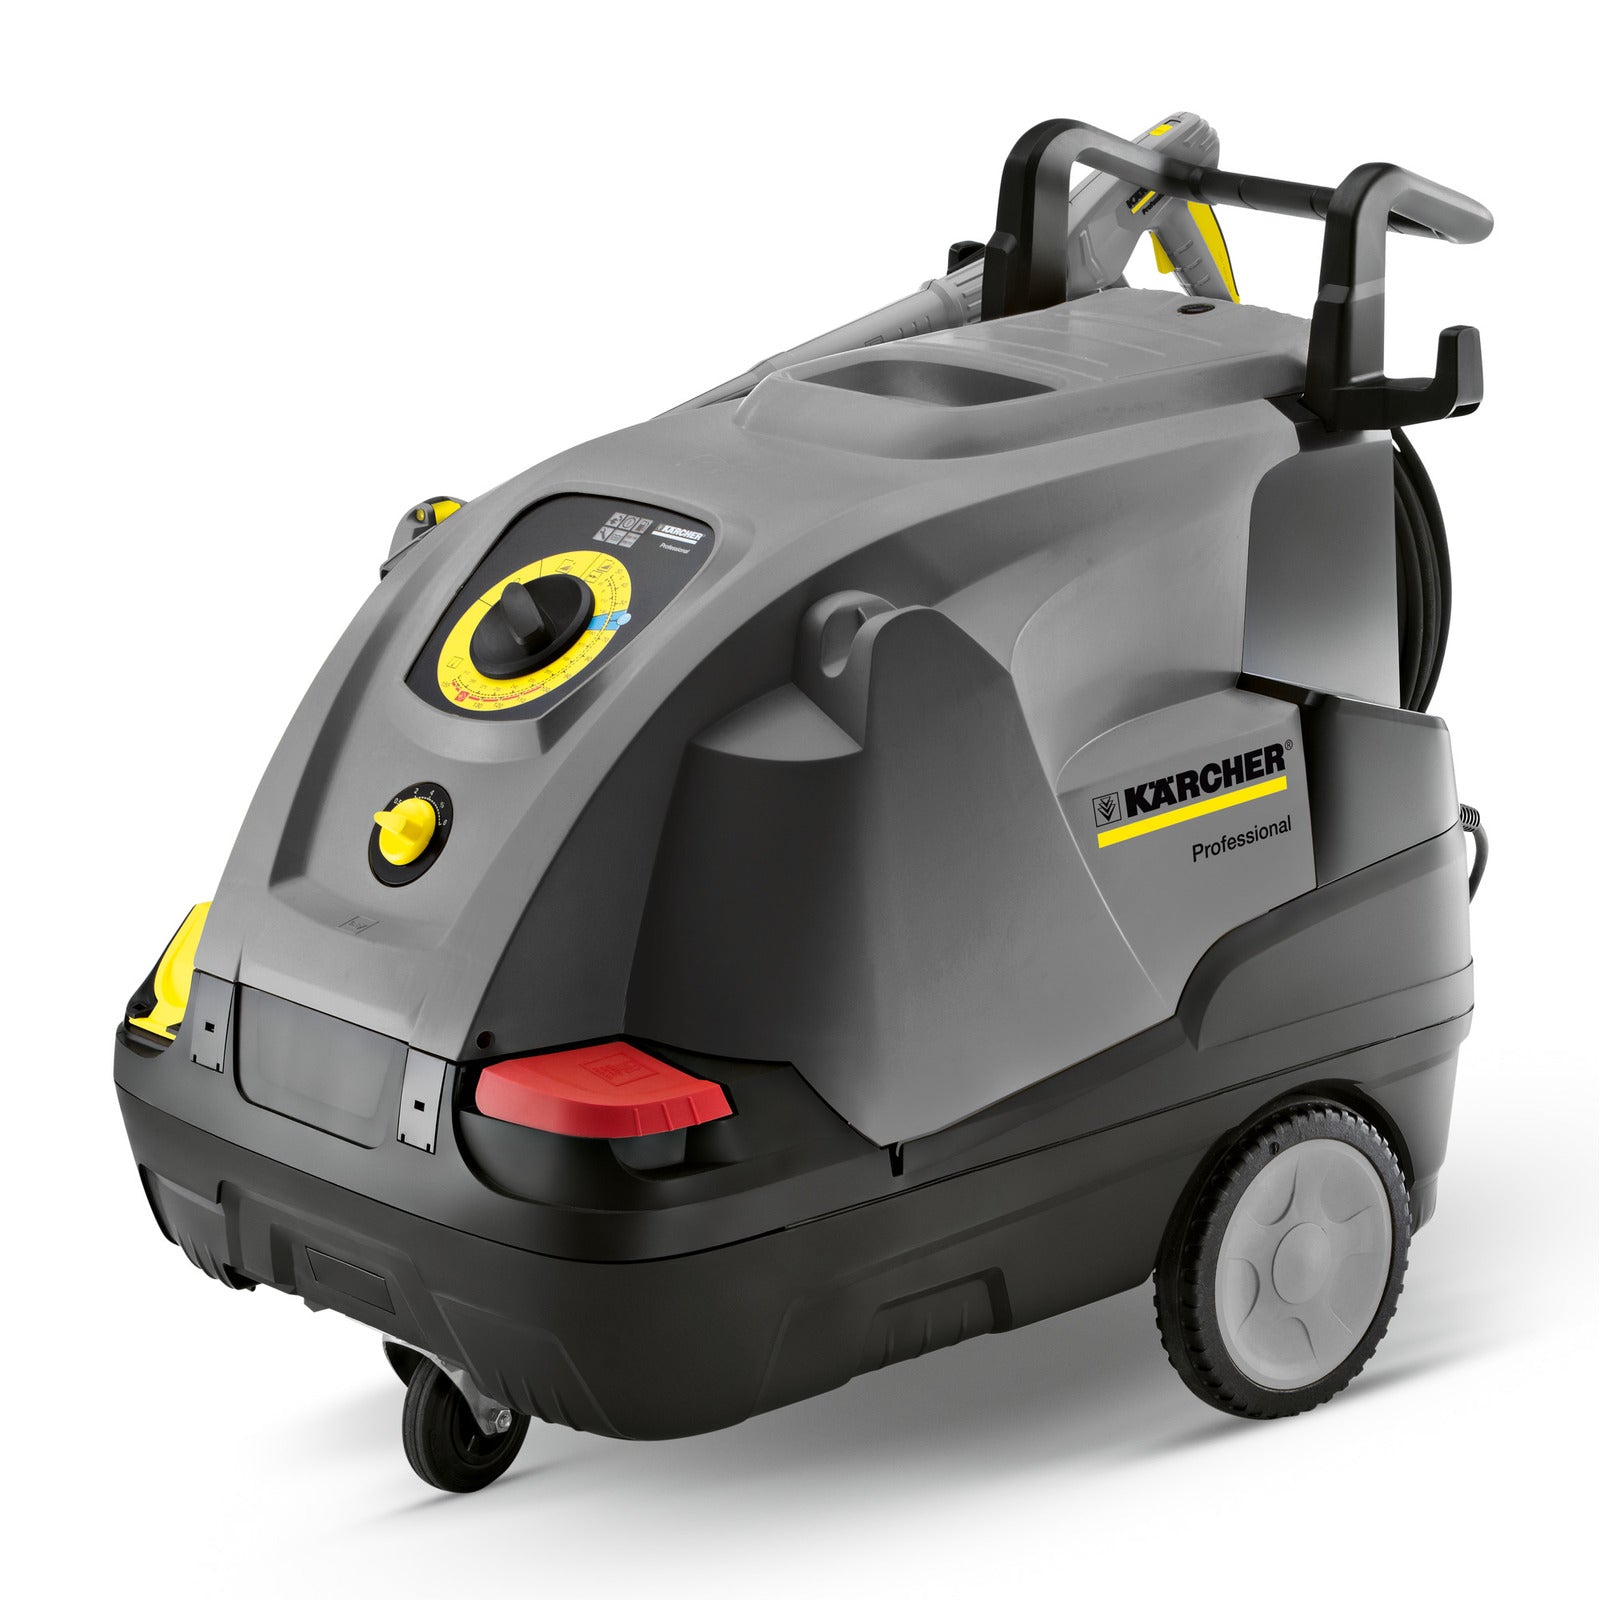 Karcher VHDS 3.0/20 C Ea HDS Compact Class Hot Water Pressure Washer - CalCleaningEquipment